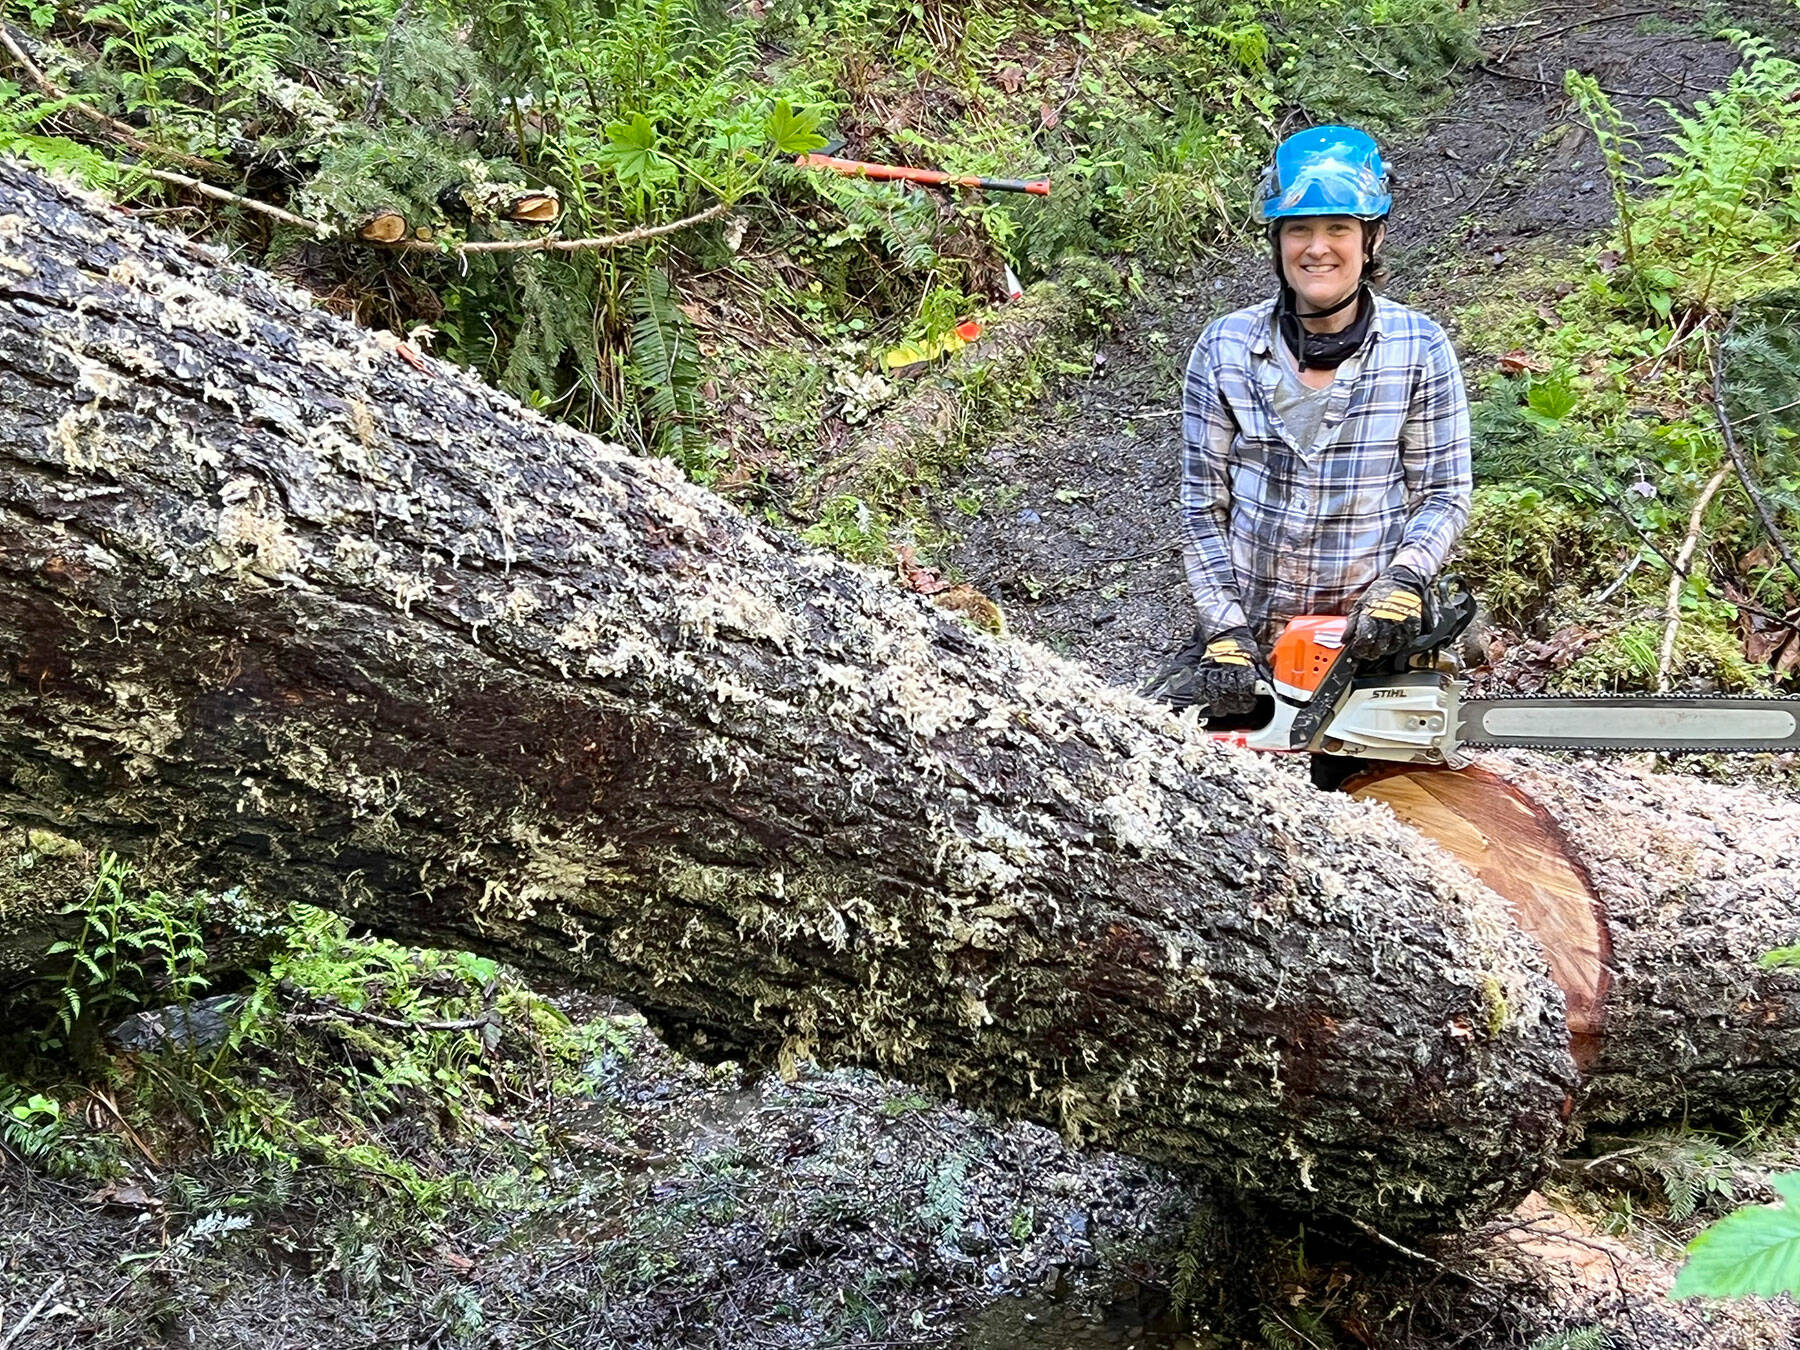 Washington Trails Association Crew Leader Rebecca Wanagel cuts away one of the hundreds of trees blocking trails up to, in and around LaBar Horse Camp in Olympic National Forest. She said it was a “herculean effort” to clear all the fallen logs, but through teamwork by trail-loving volunteers from multiple agencies and members of Back Country Horsemen chapter, the work got done. (Photo courtesy Bob Hoyle)